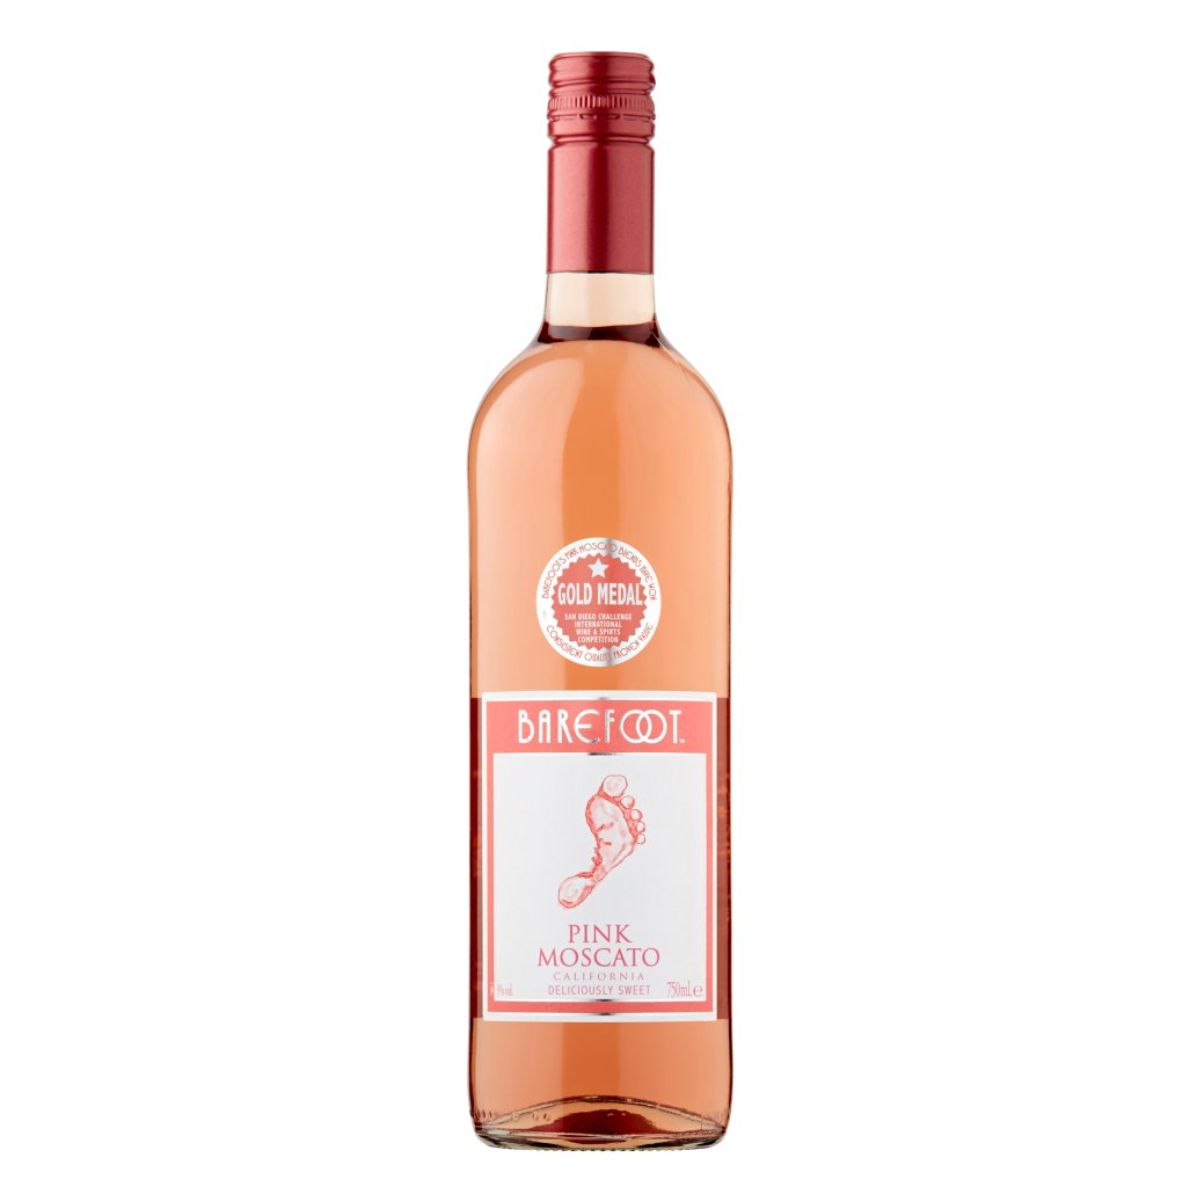 A bottle of Barefoot - Pink Moscato Rose Wine (9.0% ABV) - 750ml with a pink label.